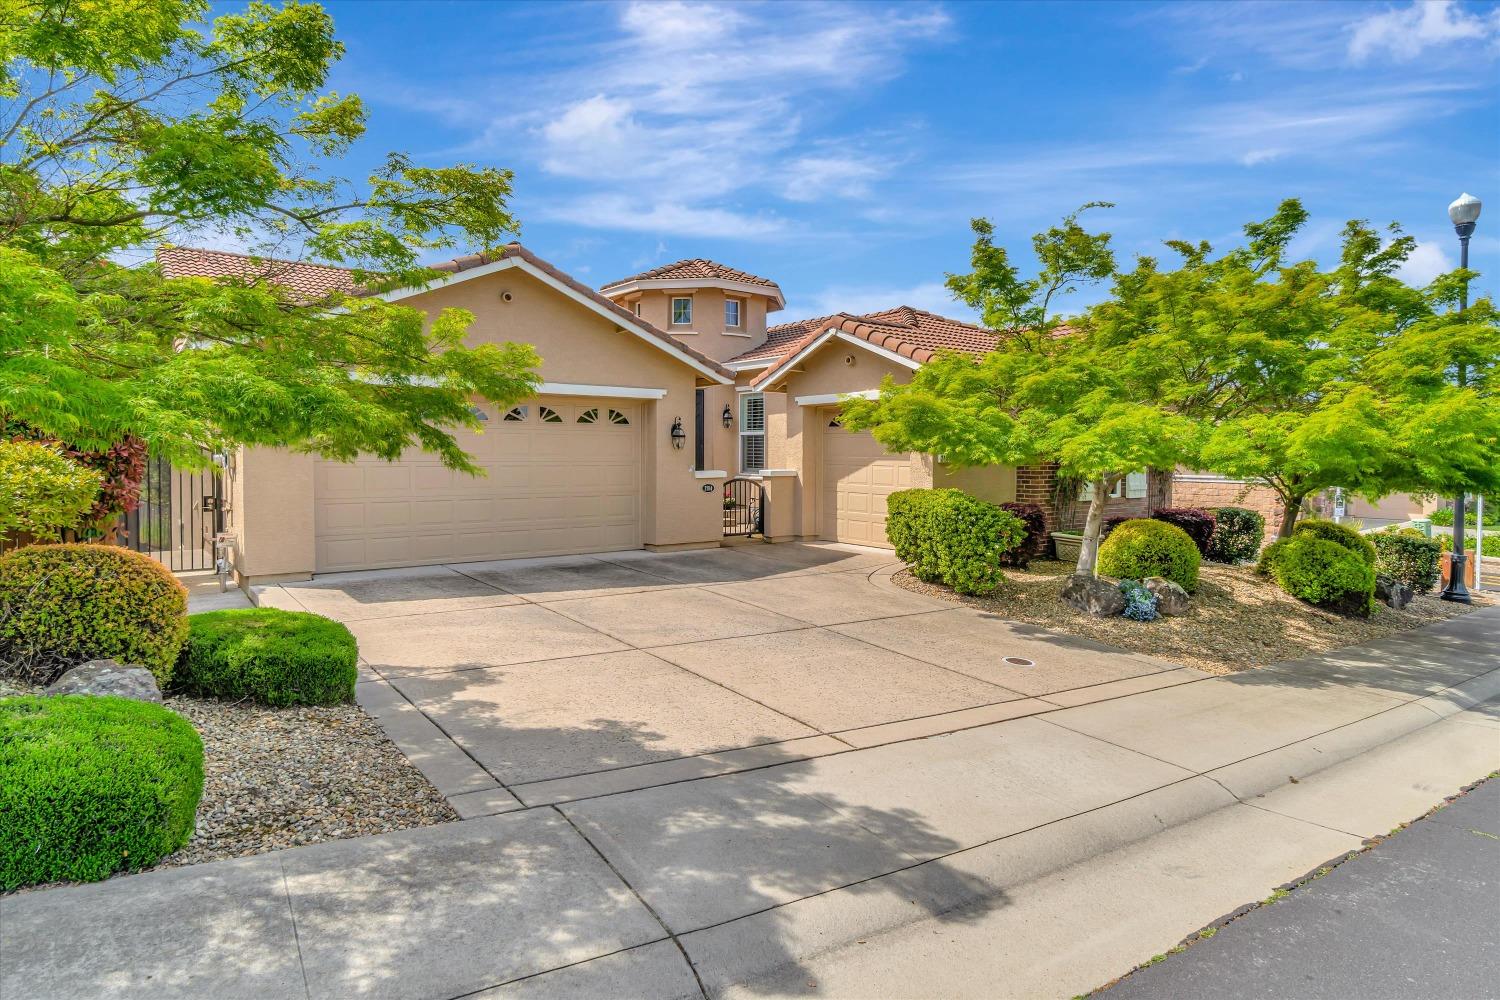 Photo of 2104 Petruchio Wy in Roseville, CA